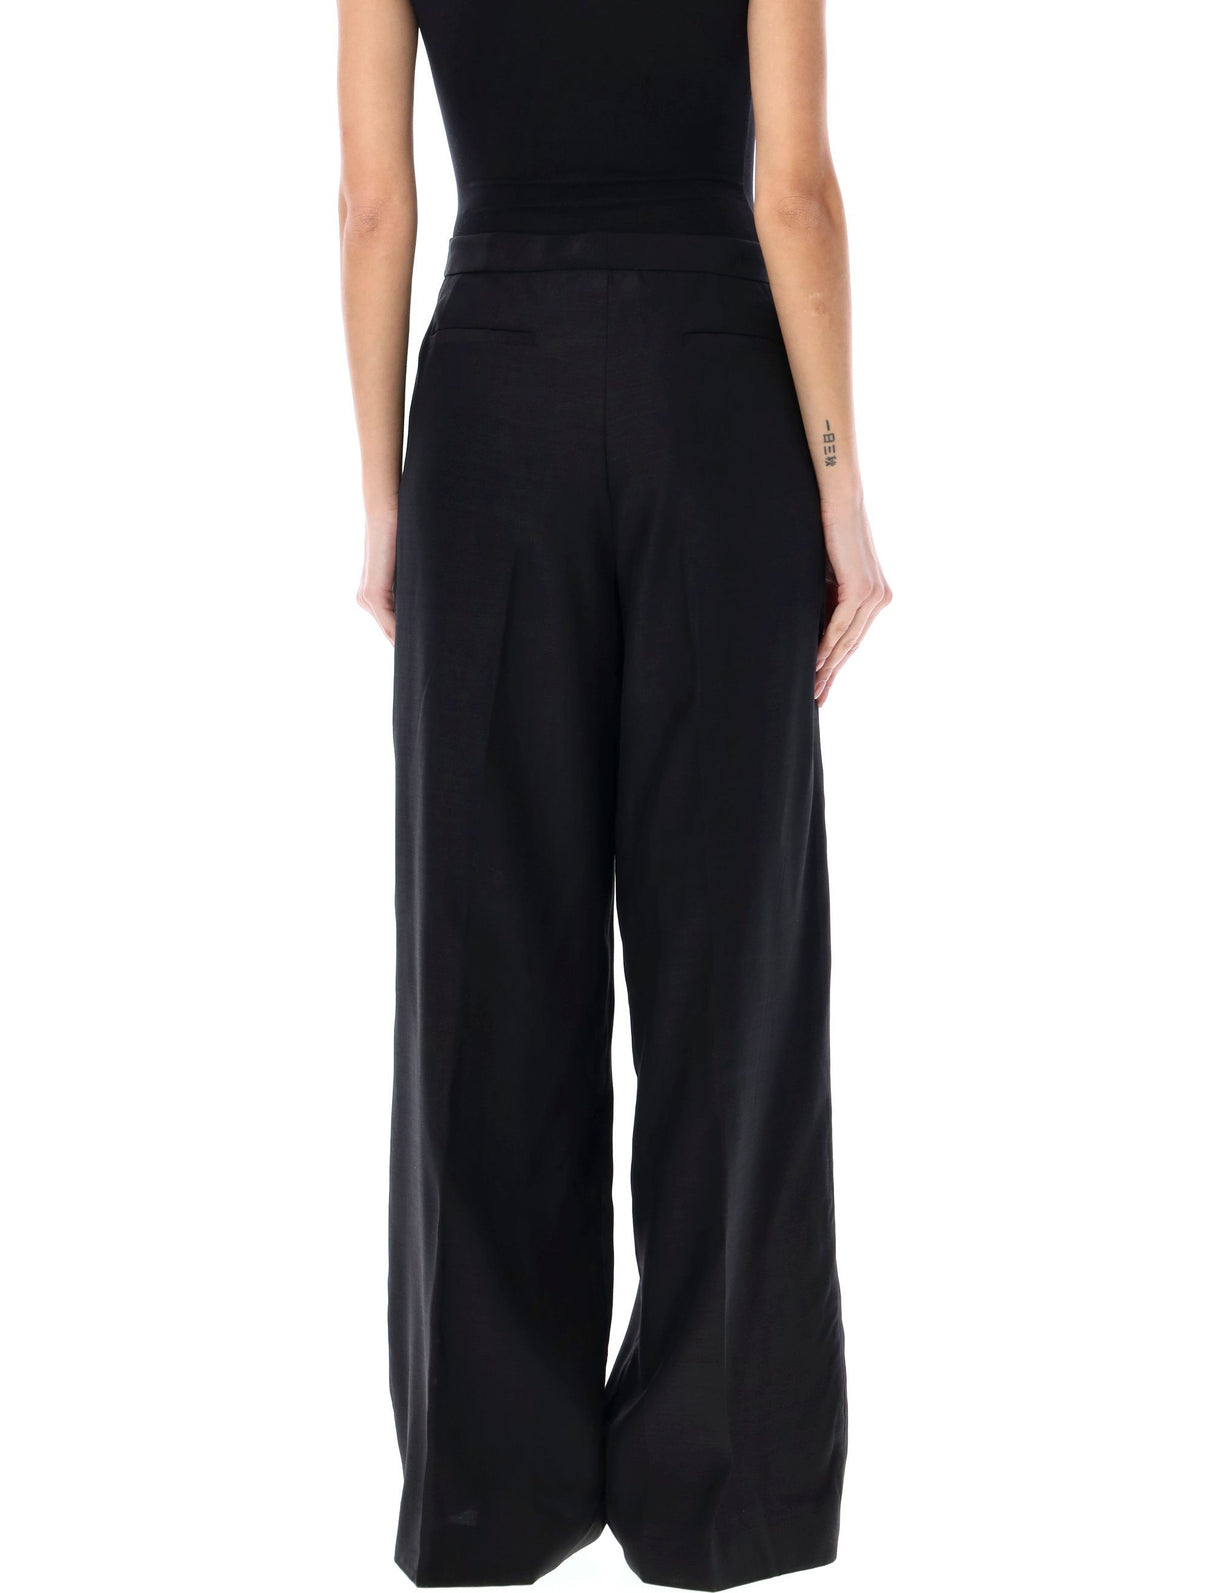 FABIANA FILIPPI Sleek and Sophisticated Wool and Silk Trousers for Women